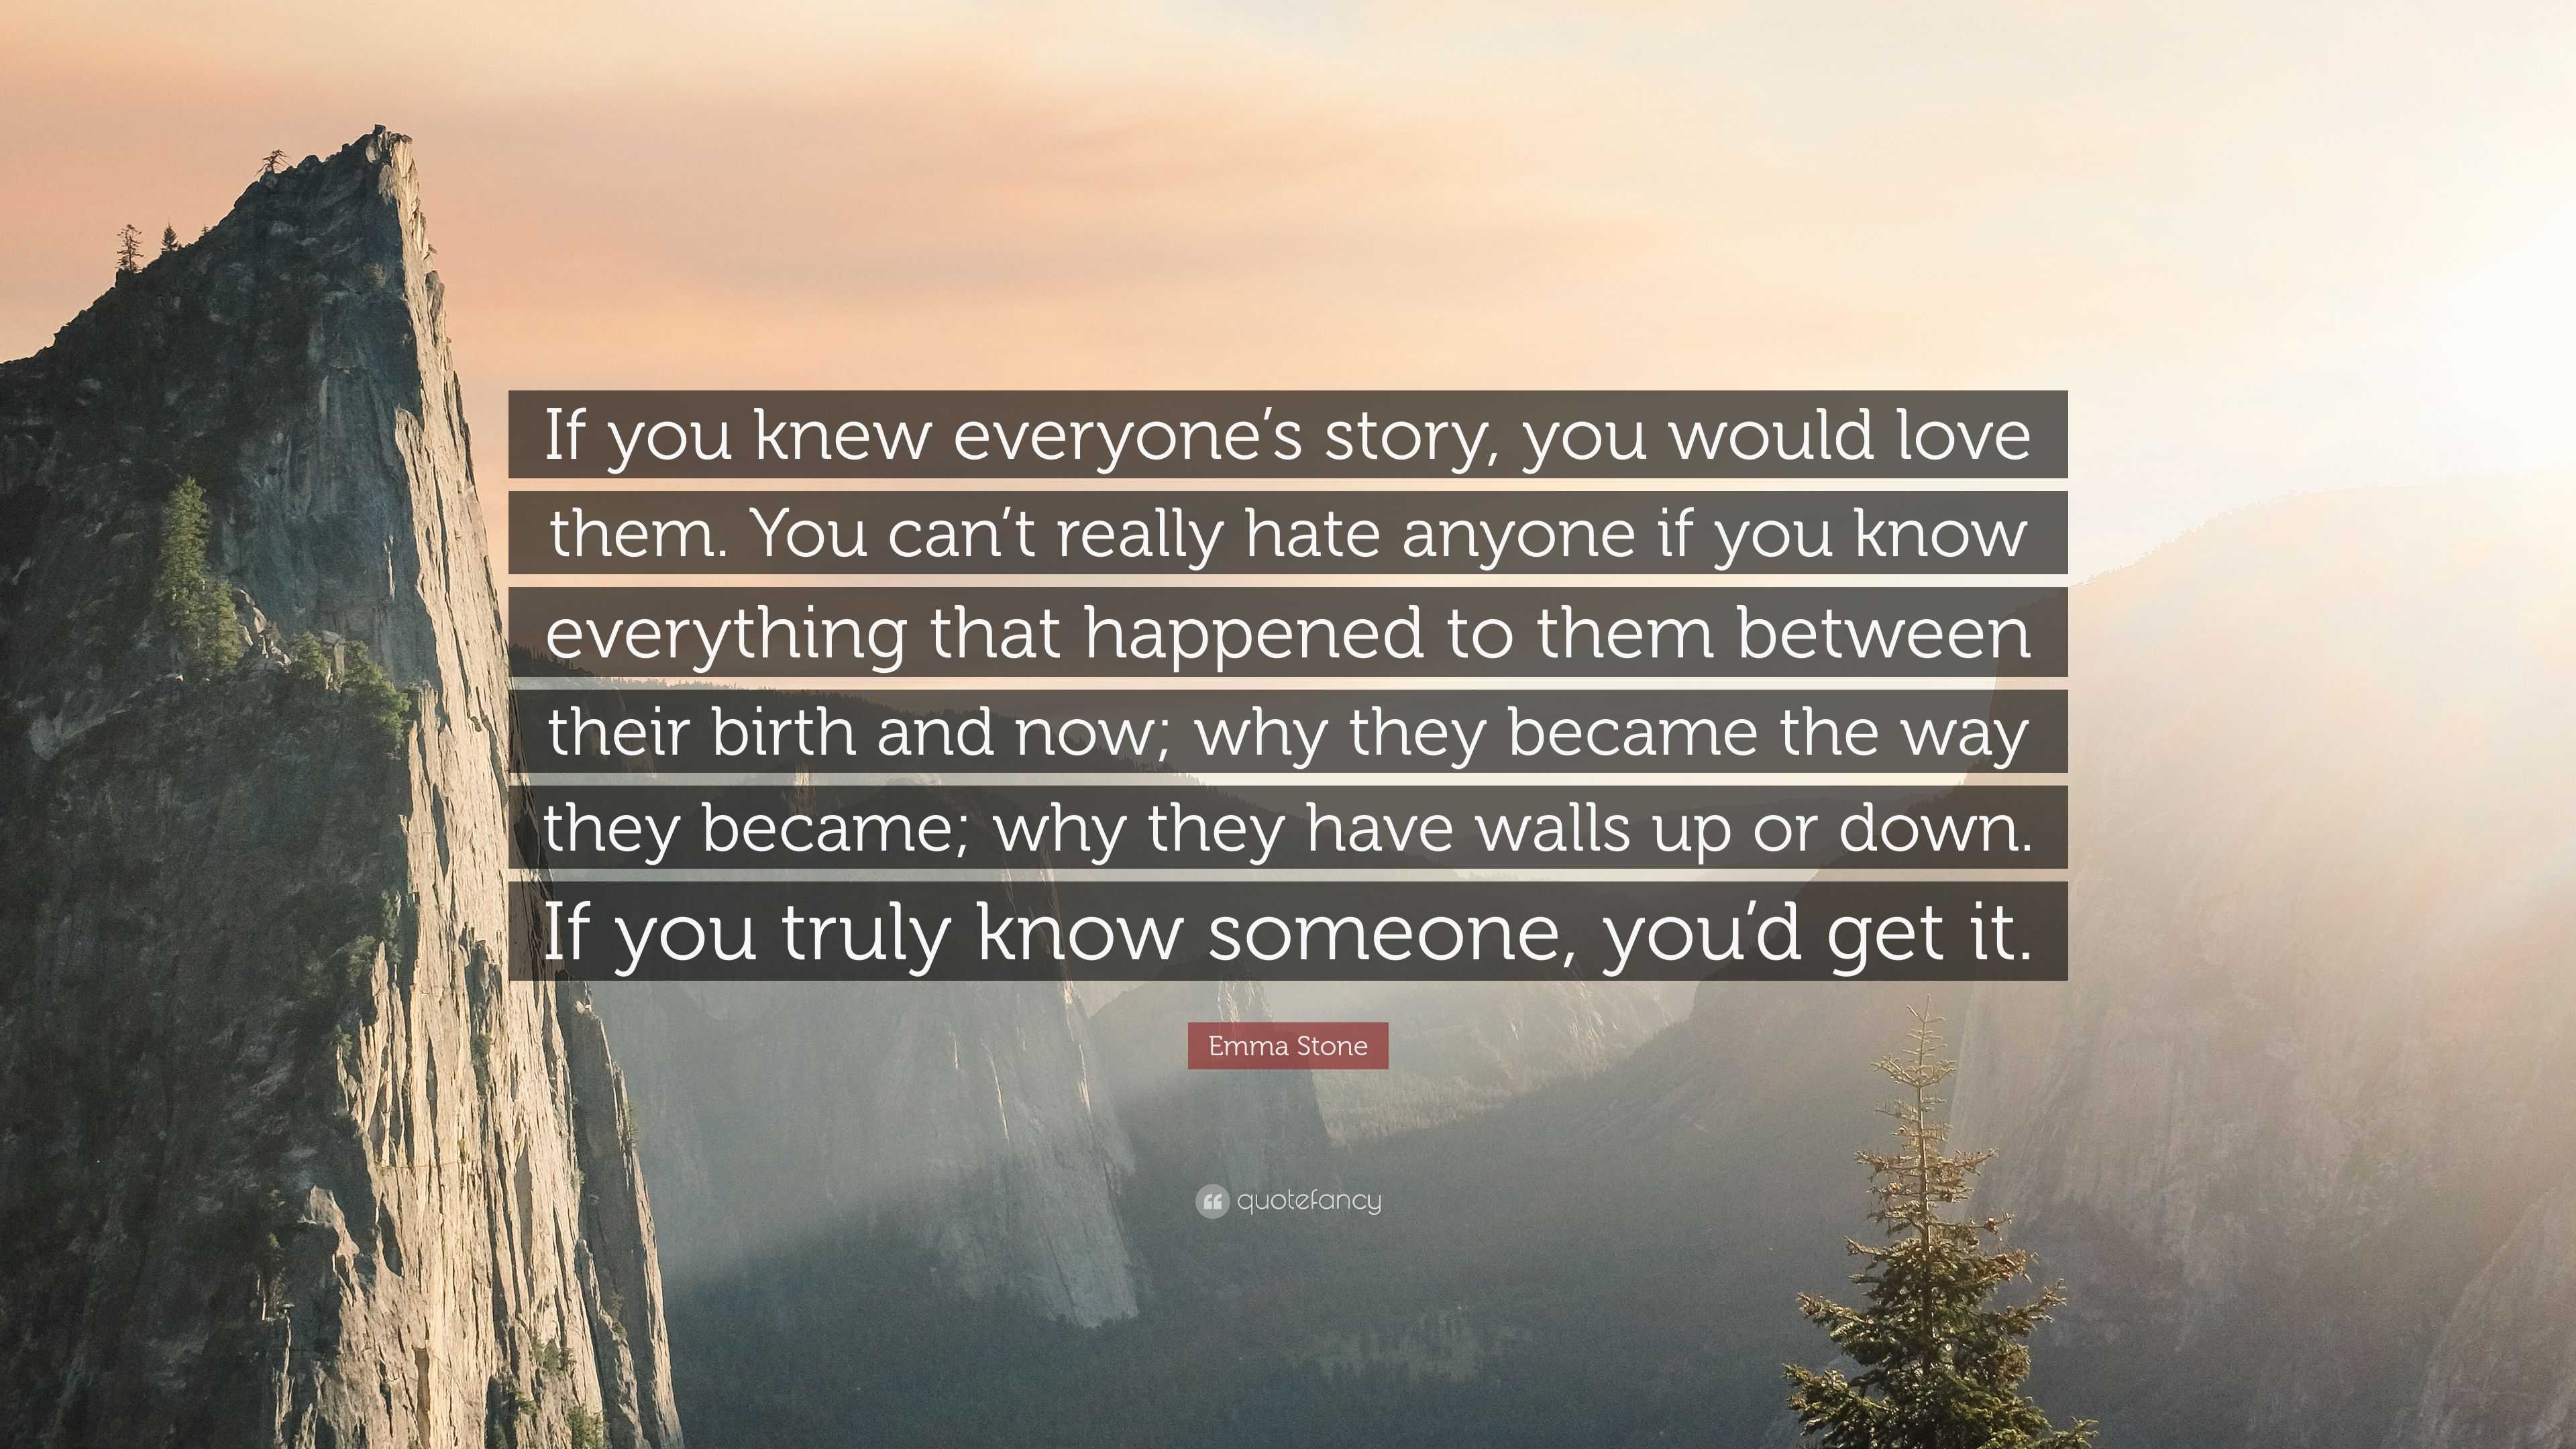 Emma Stone Quote “If you knew everyone s story you would love them